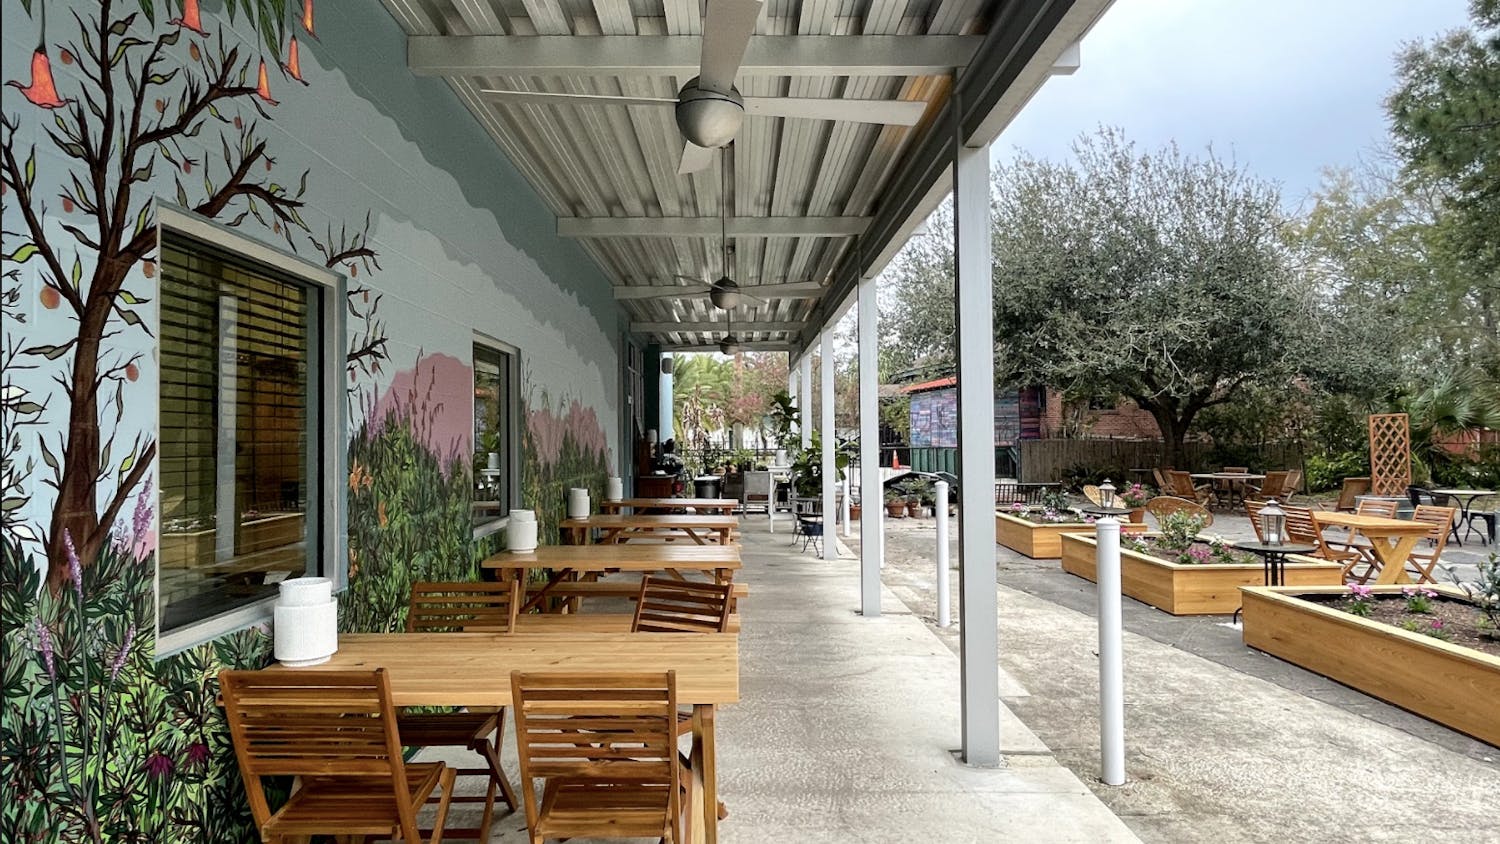 The new business opened Feb. 12 and features an outdoor wine garden. 